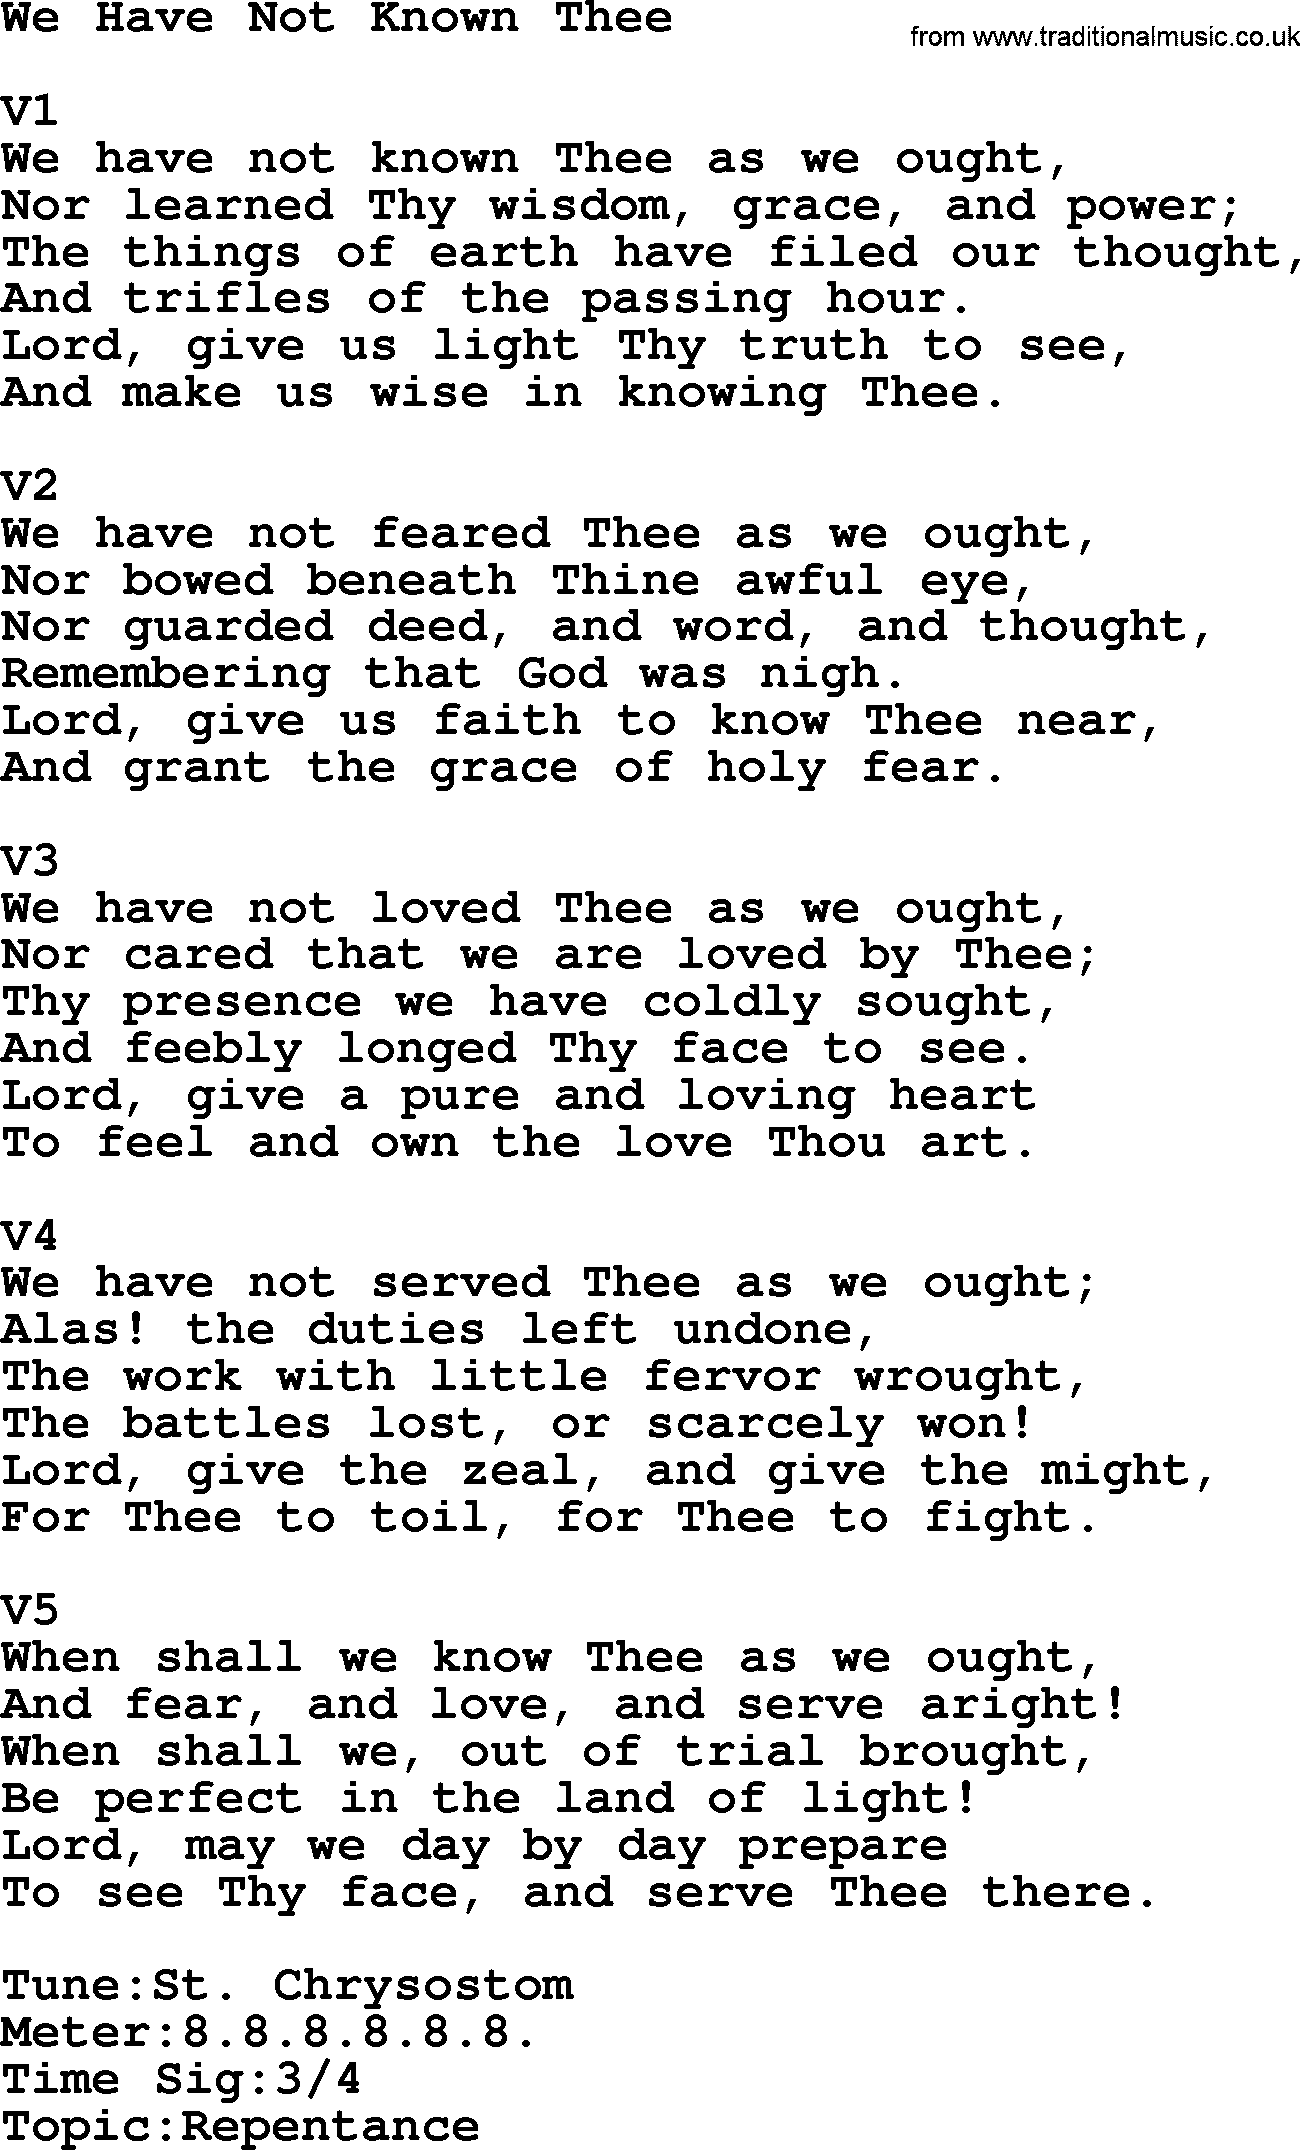 Adventist Hynms collection, Hymn: We Have Not Known Thee, lyrics with PDF